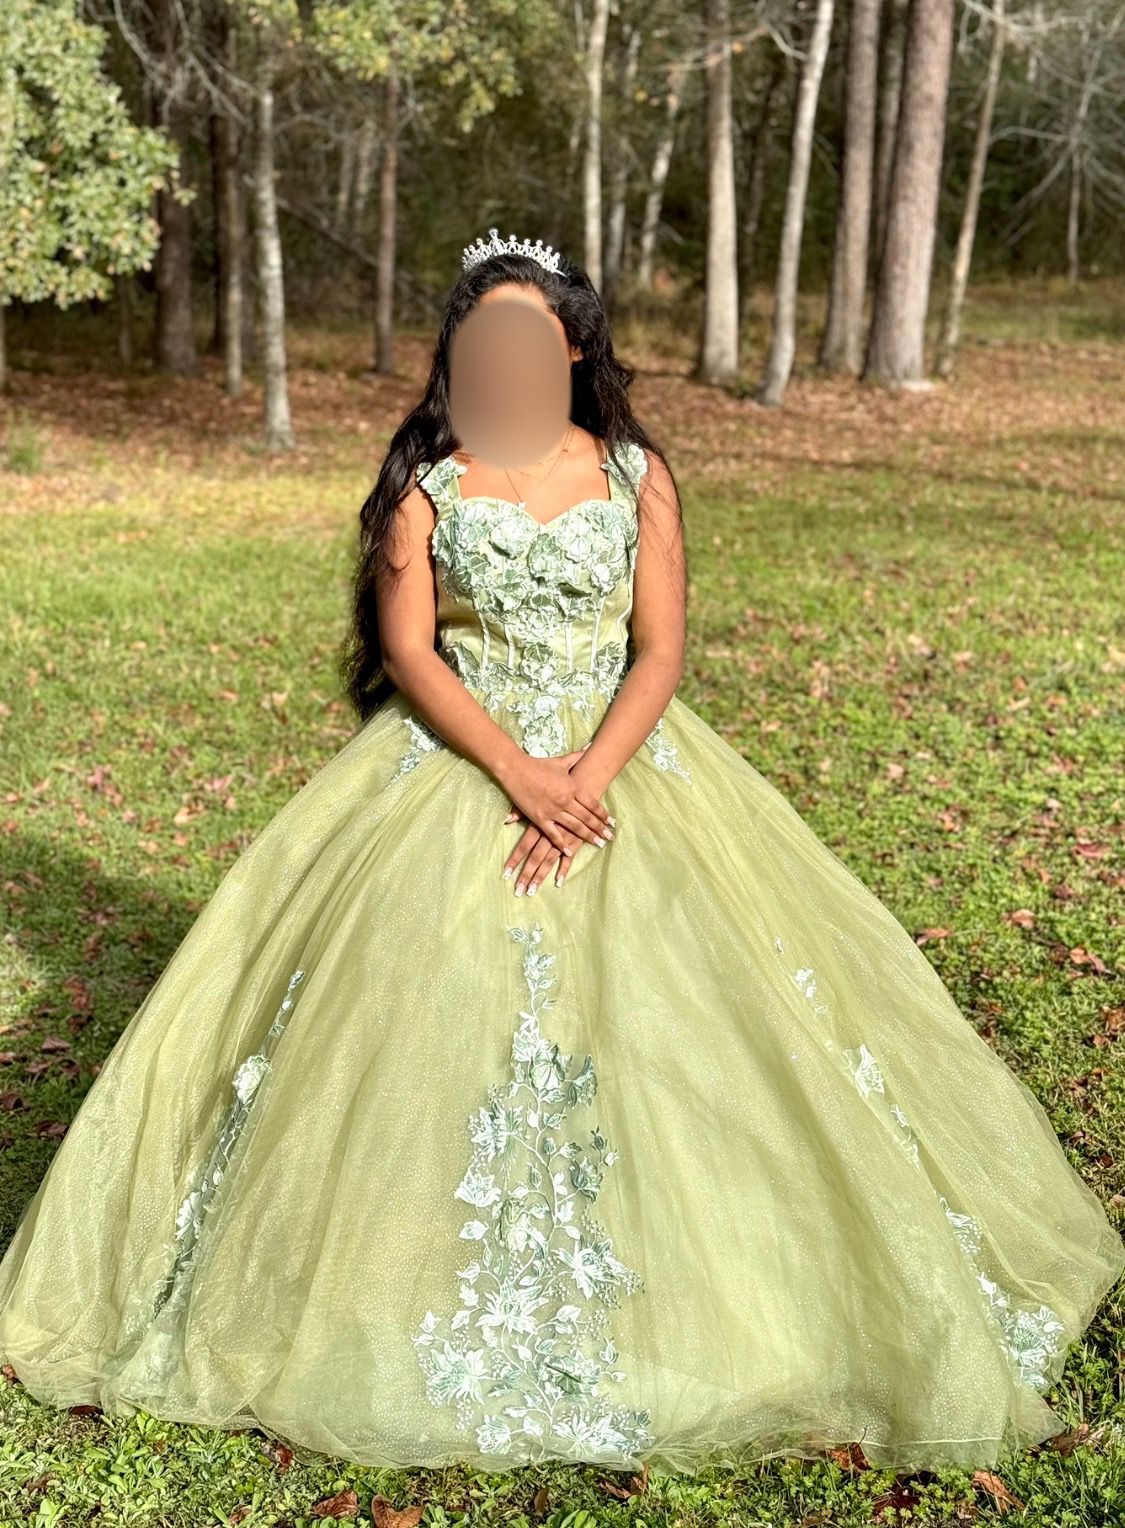 Exquisite Ball Gown And Hoop Skirt Size 8